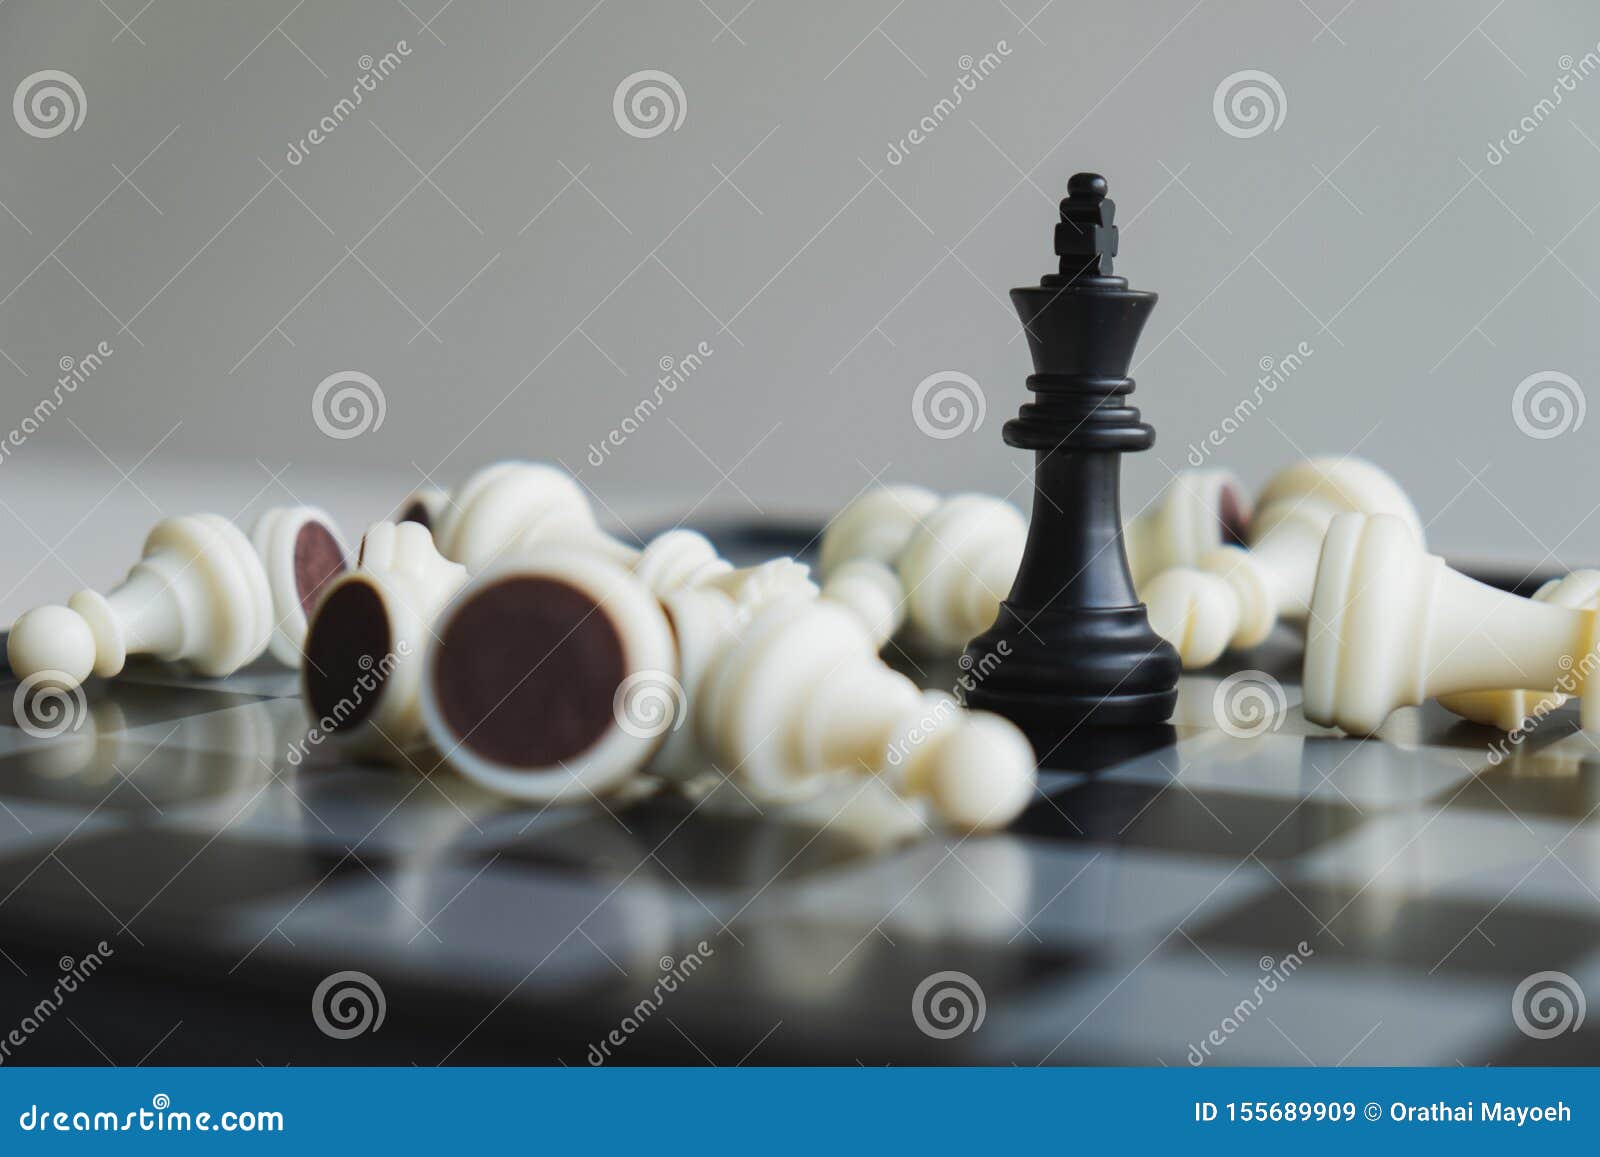 the chess board shows leadership, followers and business success strategies